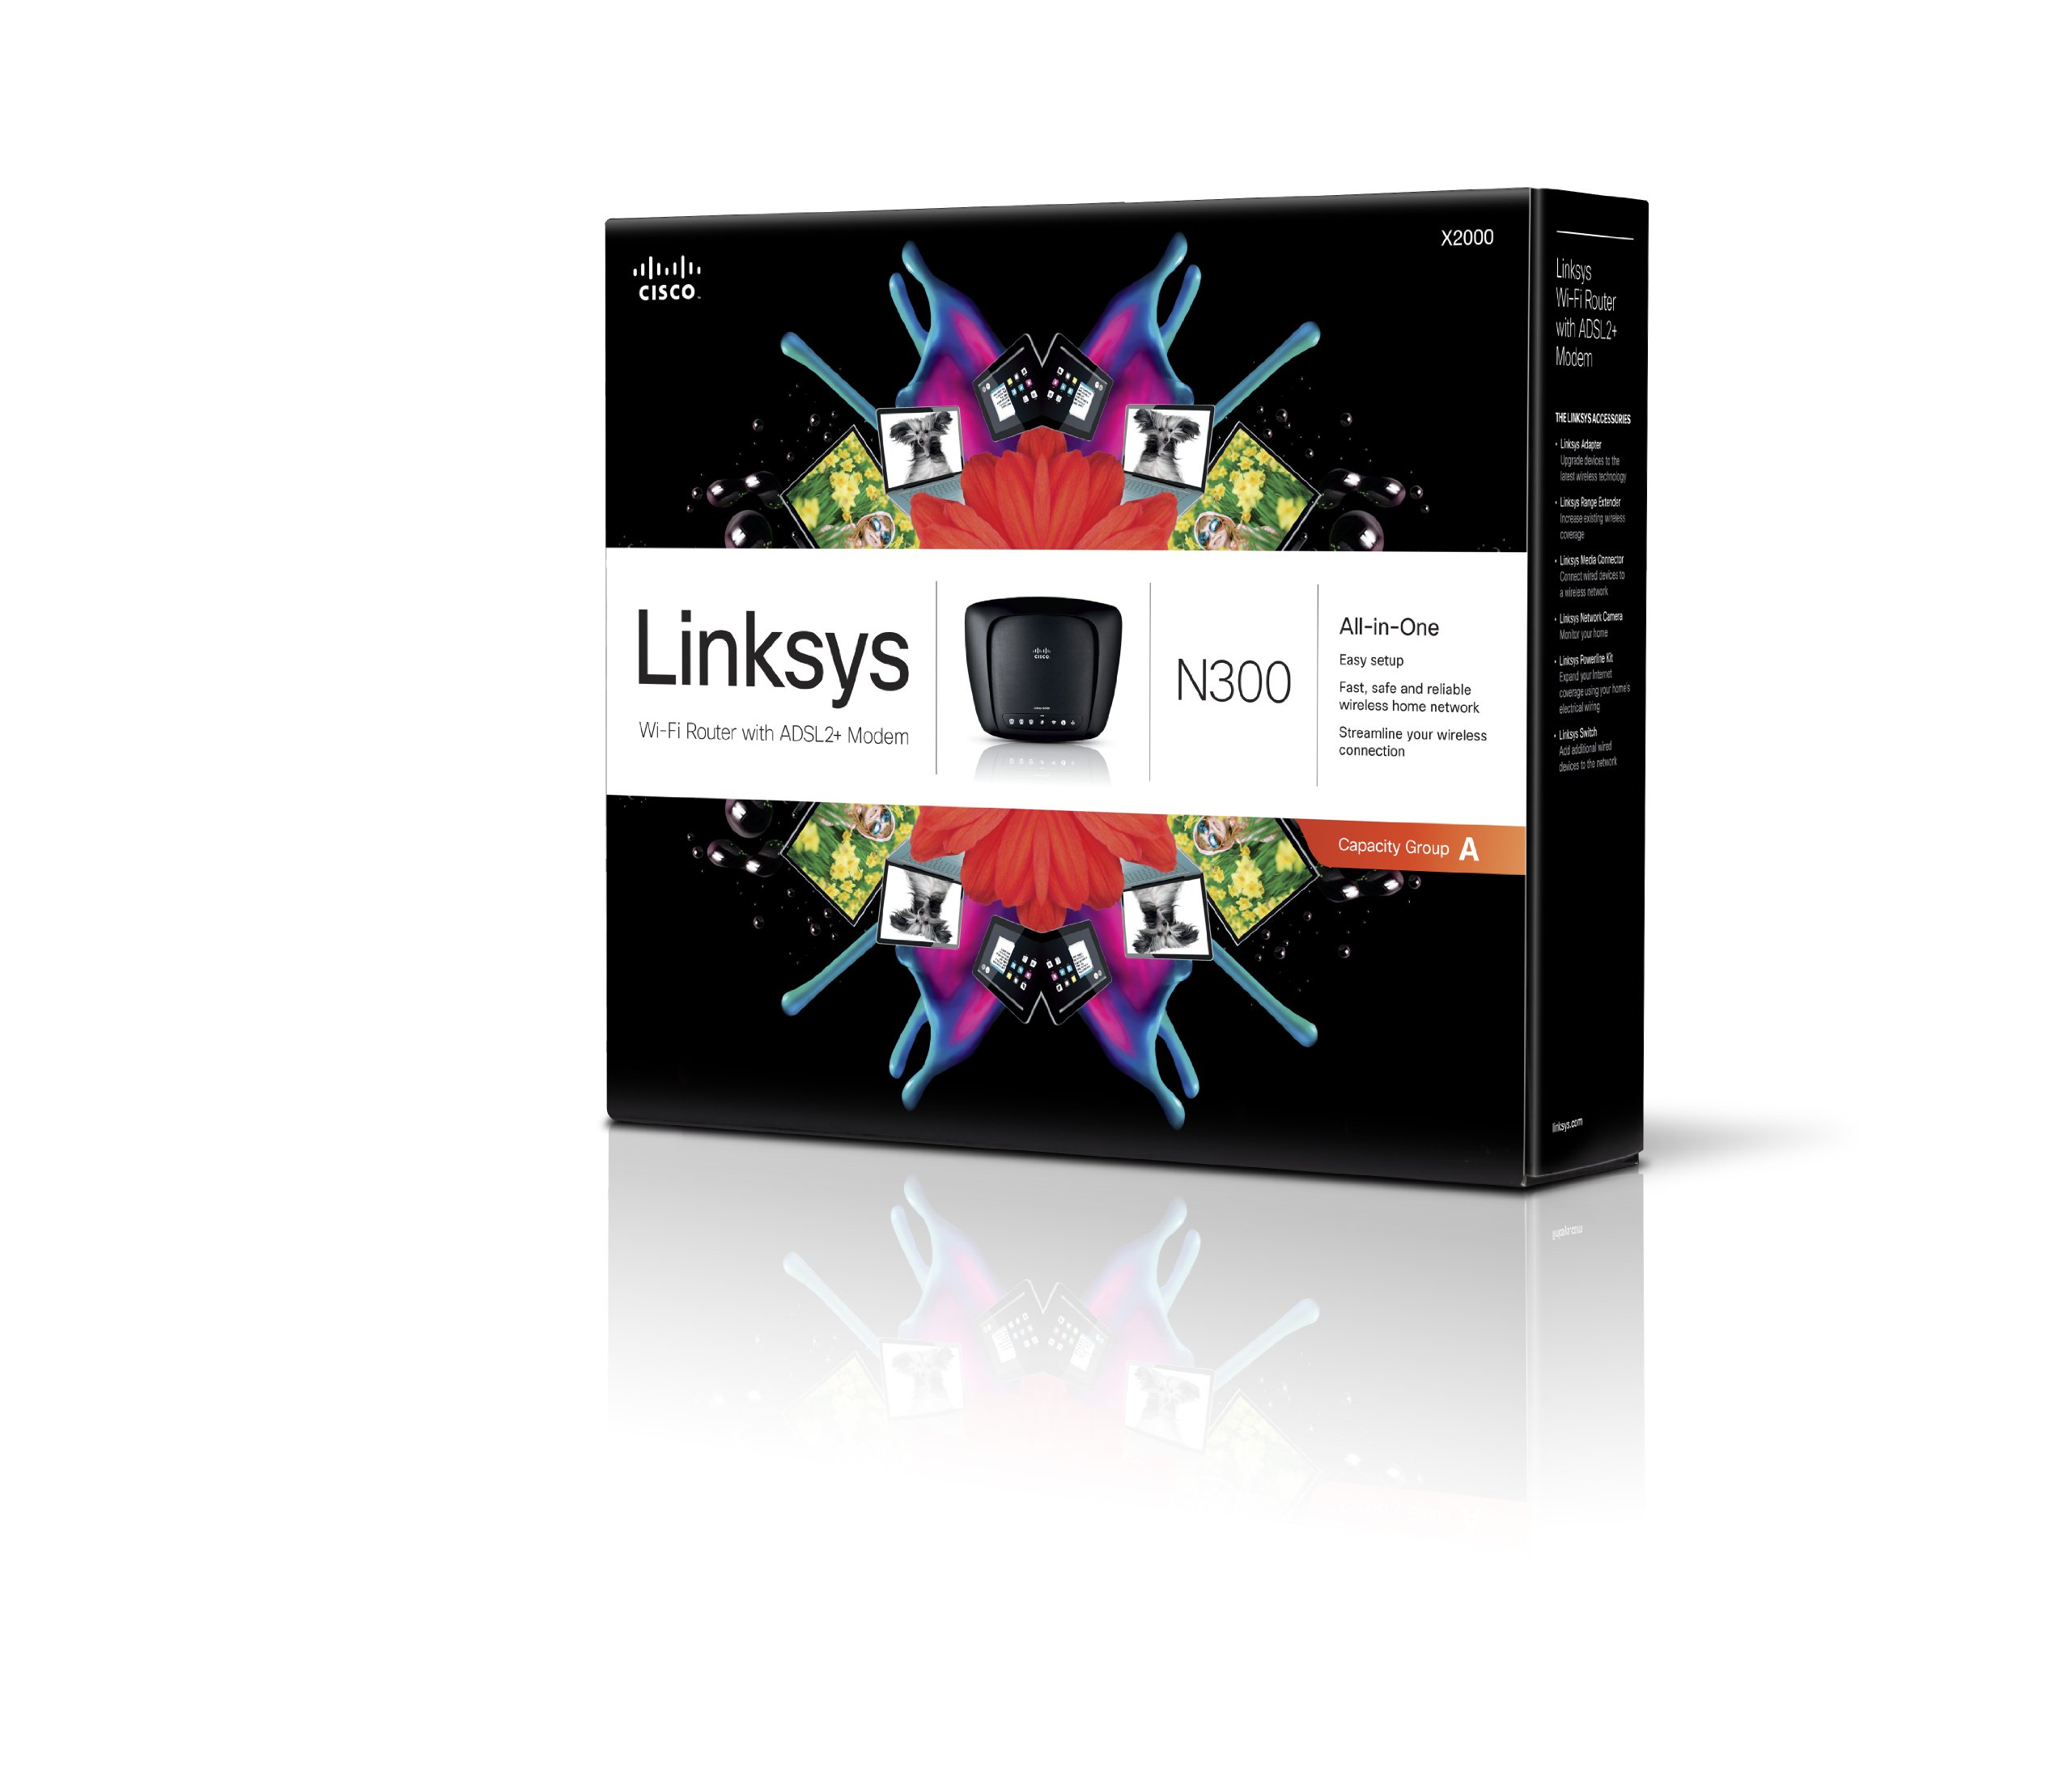 Linksys X2000 Wireless-N Router with ADSL2+ Modem